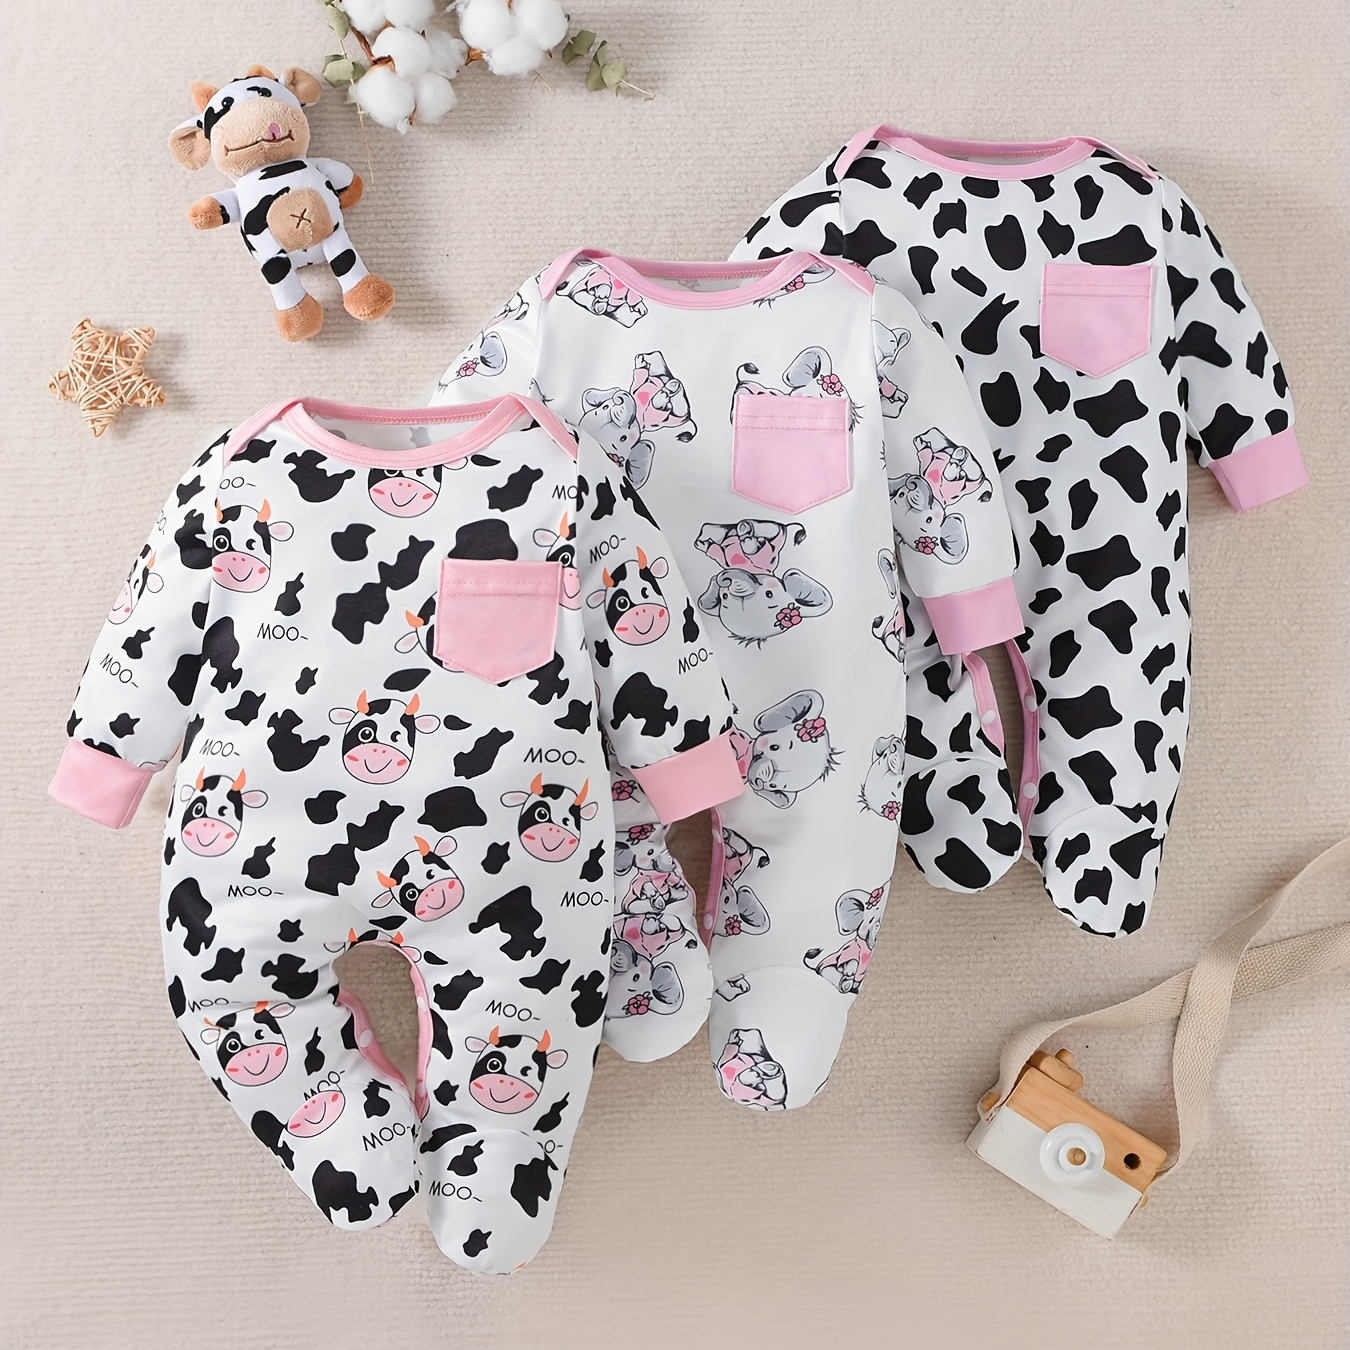 

Newborn Baby Girl Cute Cartoon Little Animal Print Footed Bodysuit 3pcs Set Decorated With Small Pockets